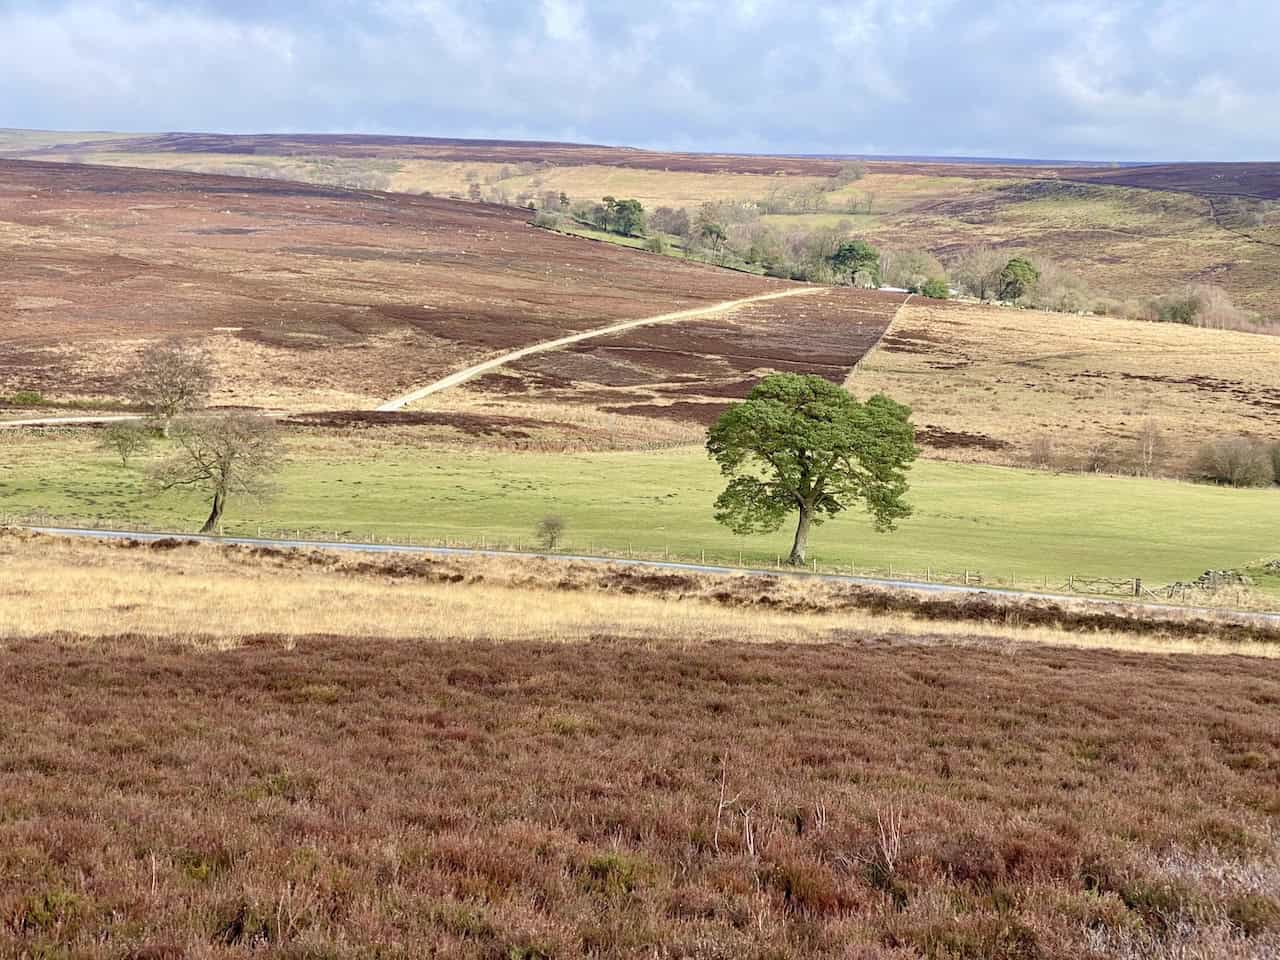 The track across the moorland to Sportsman's Hall is easy to spot from Hawnby Hill.